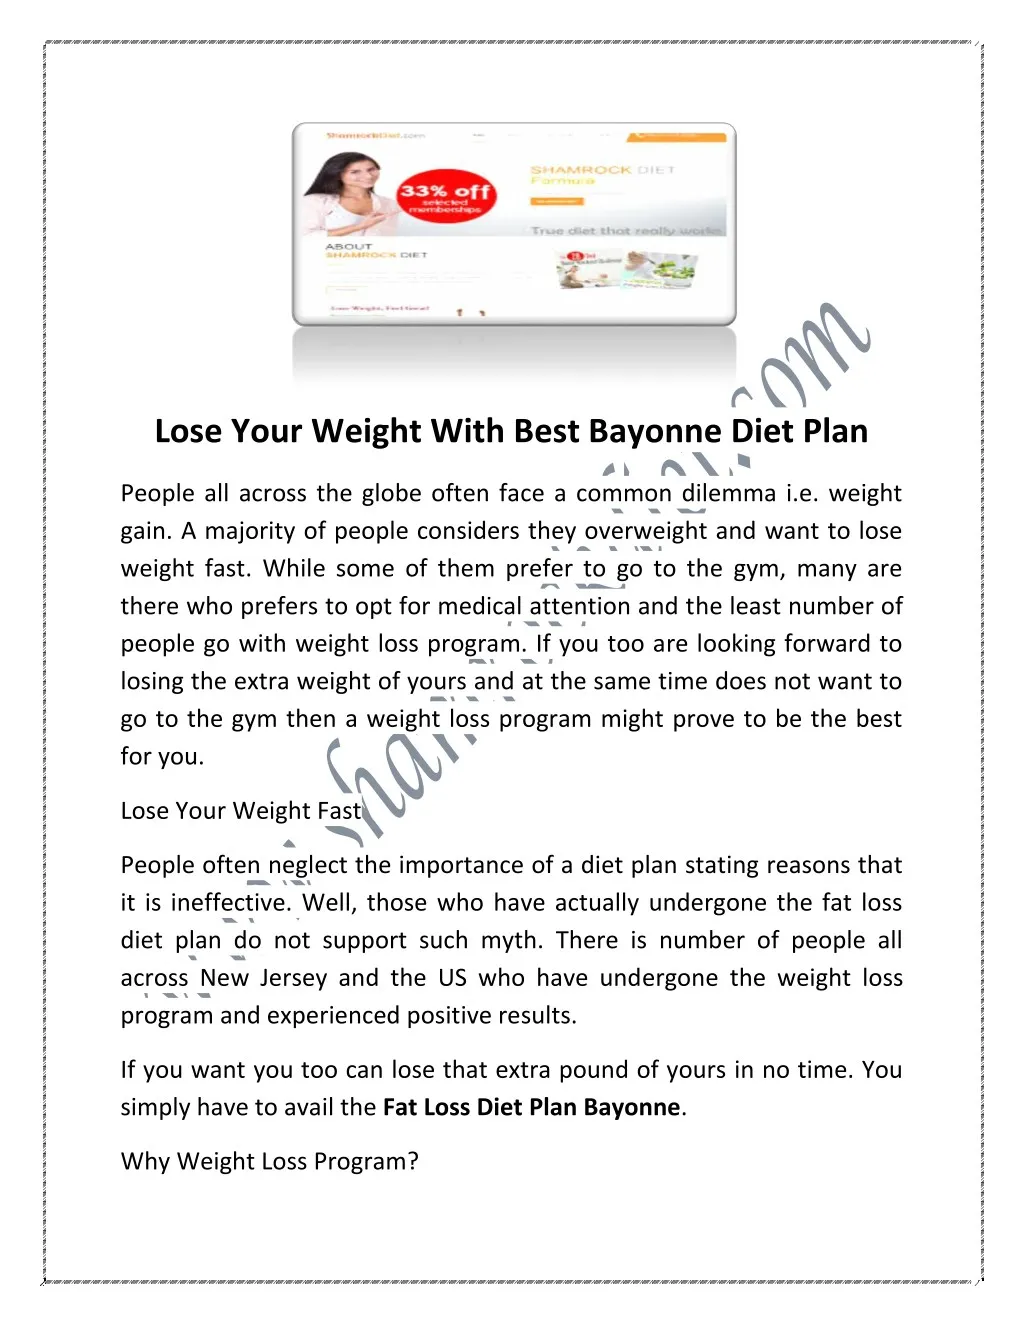 lose your weight with best bayonne diet plan